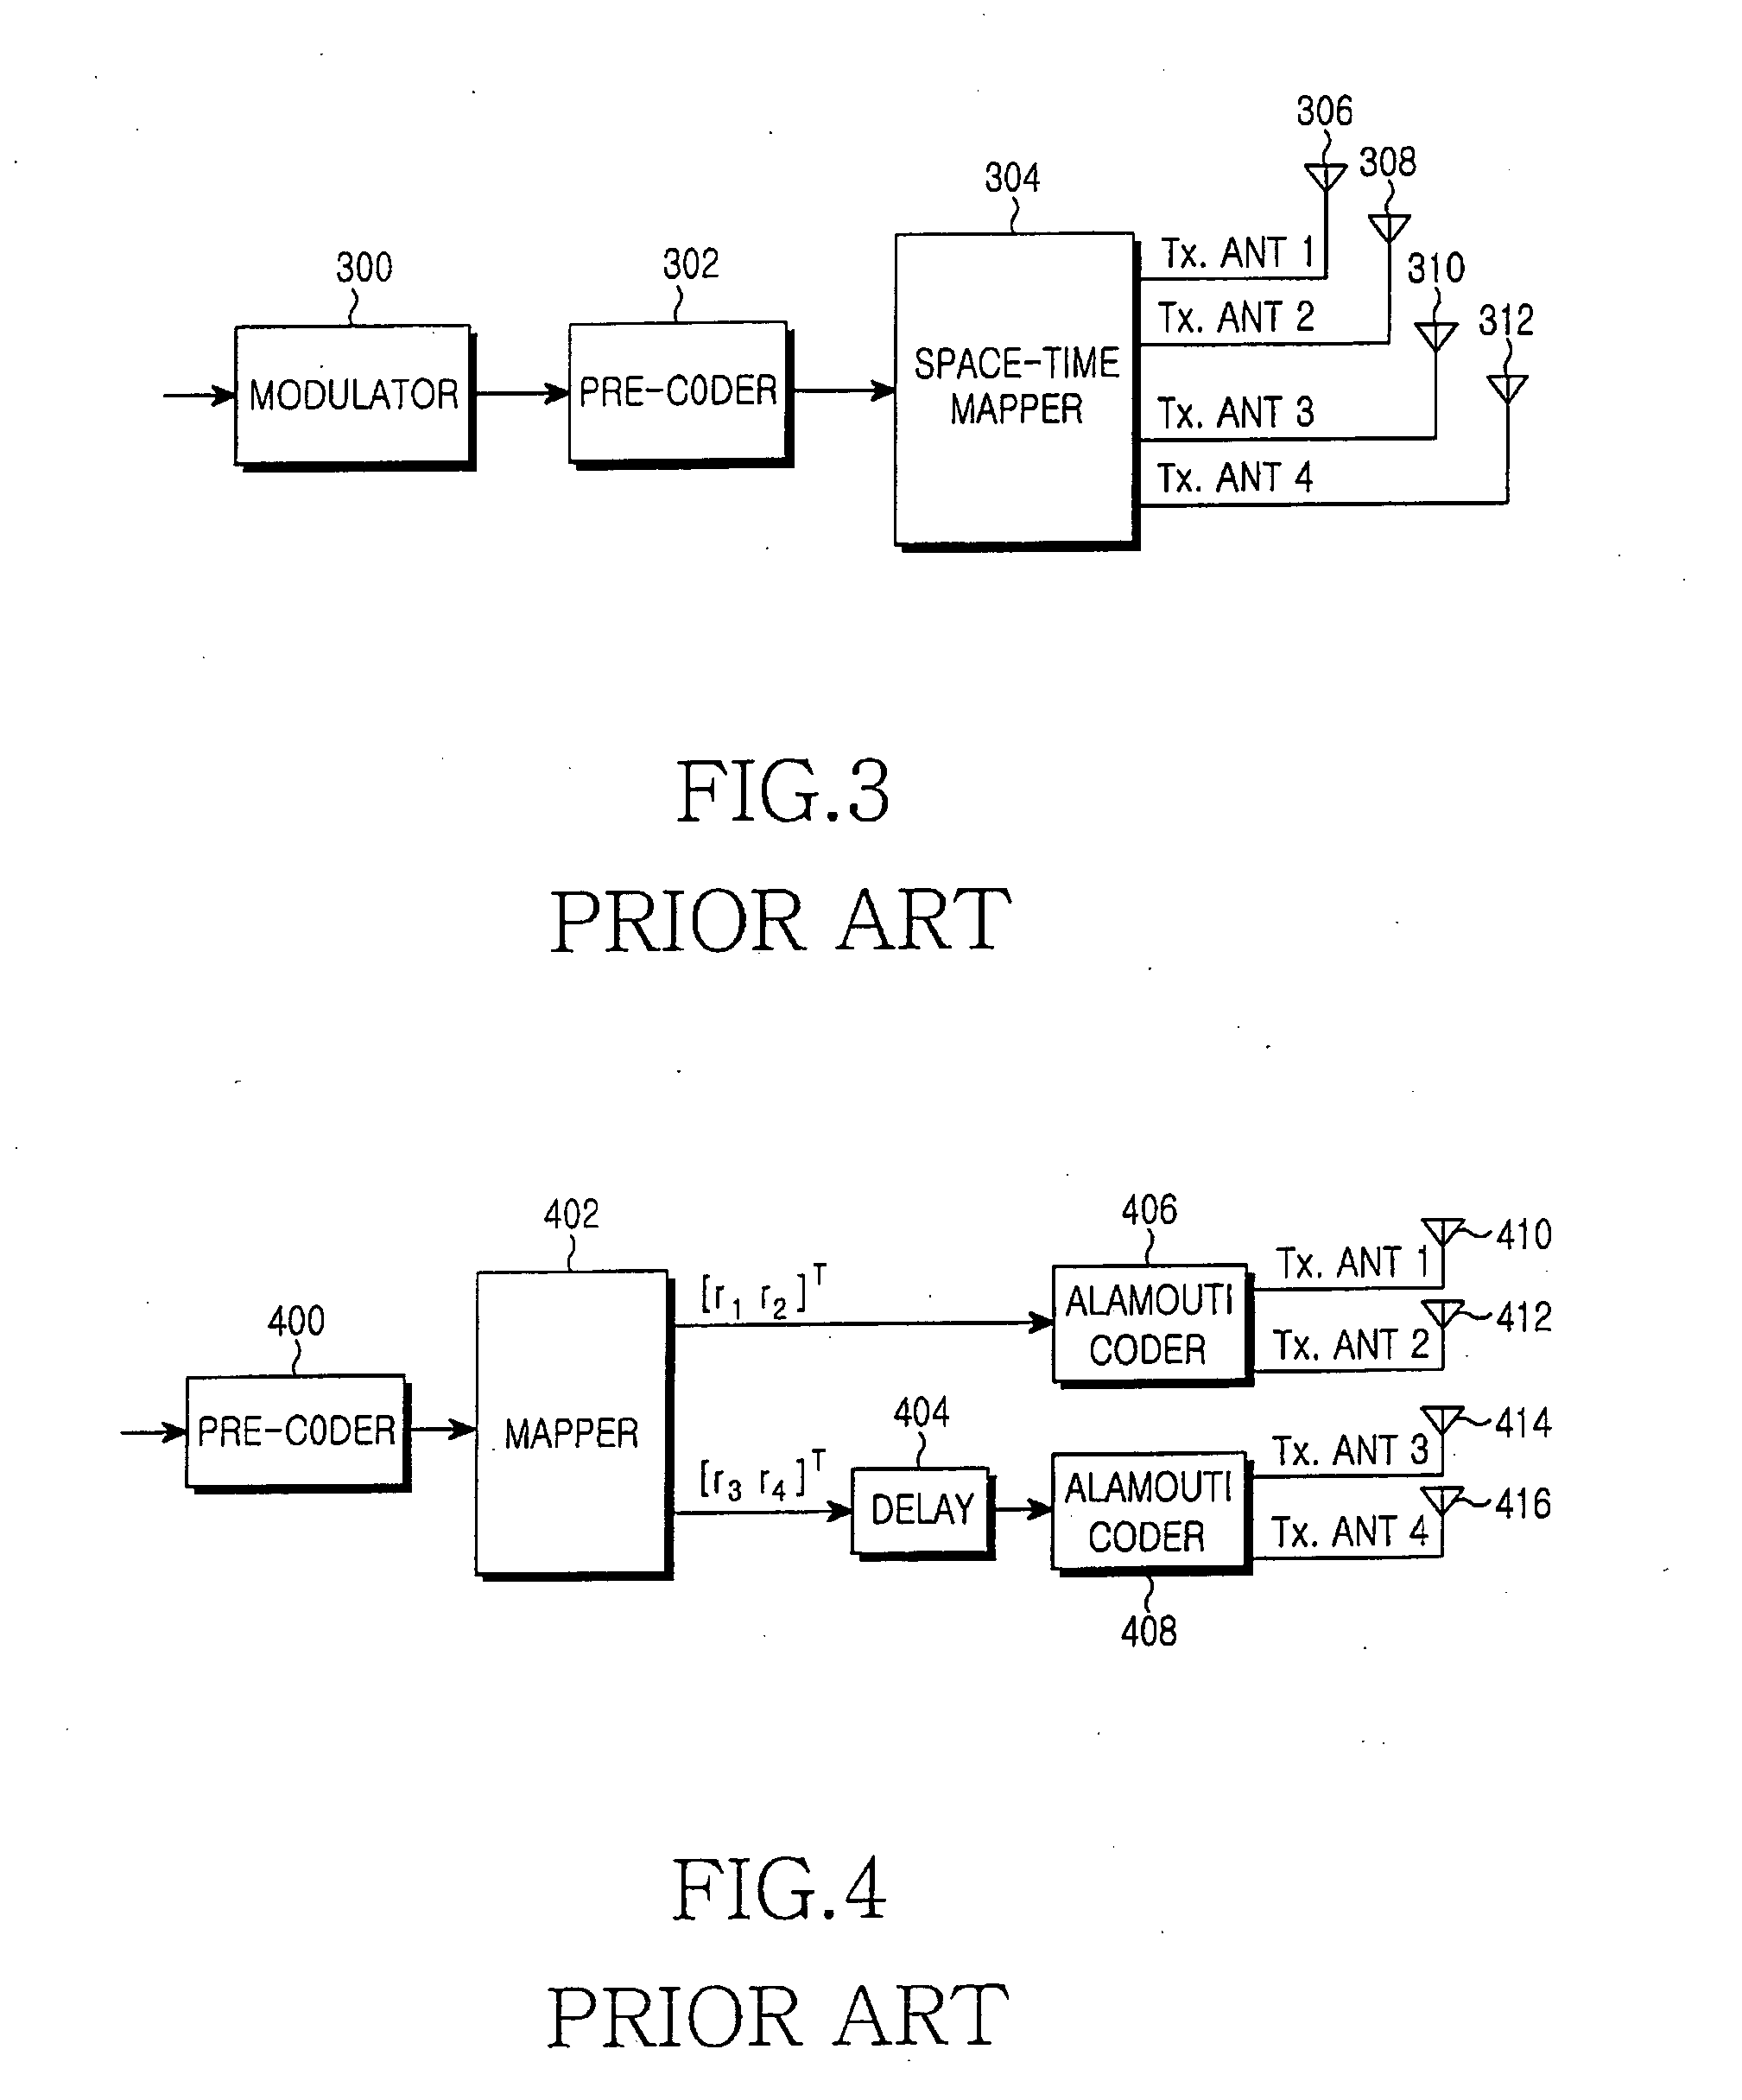 Apparatus and method for space-time block coding for increasing coding gain